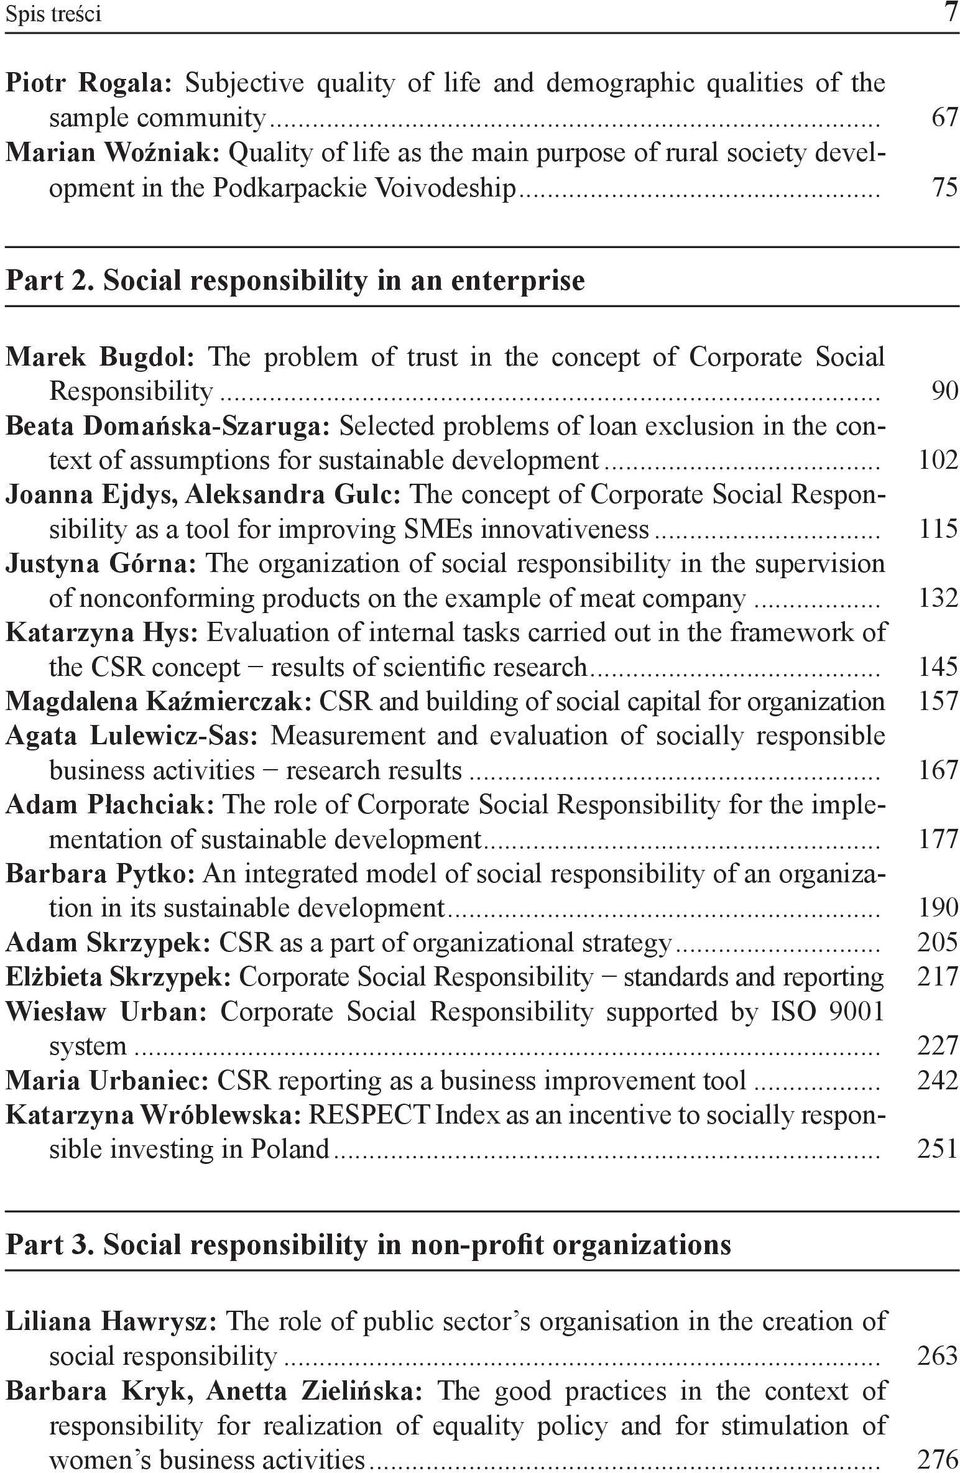 Social responsibility in an enterprise Marek Bugdol: The problem of trust in the concept of Corporate Social Responsibility.